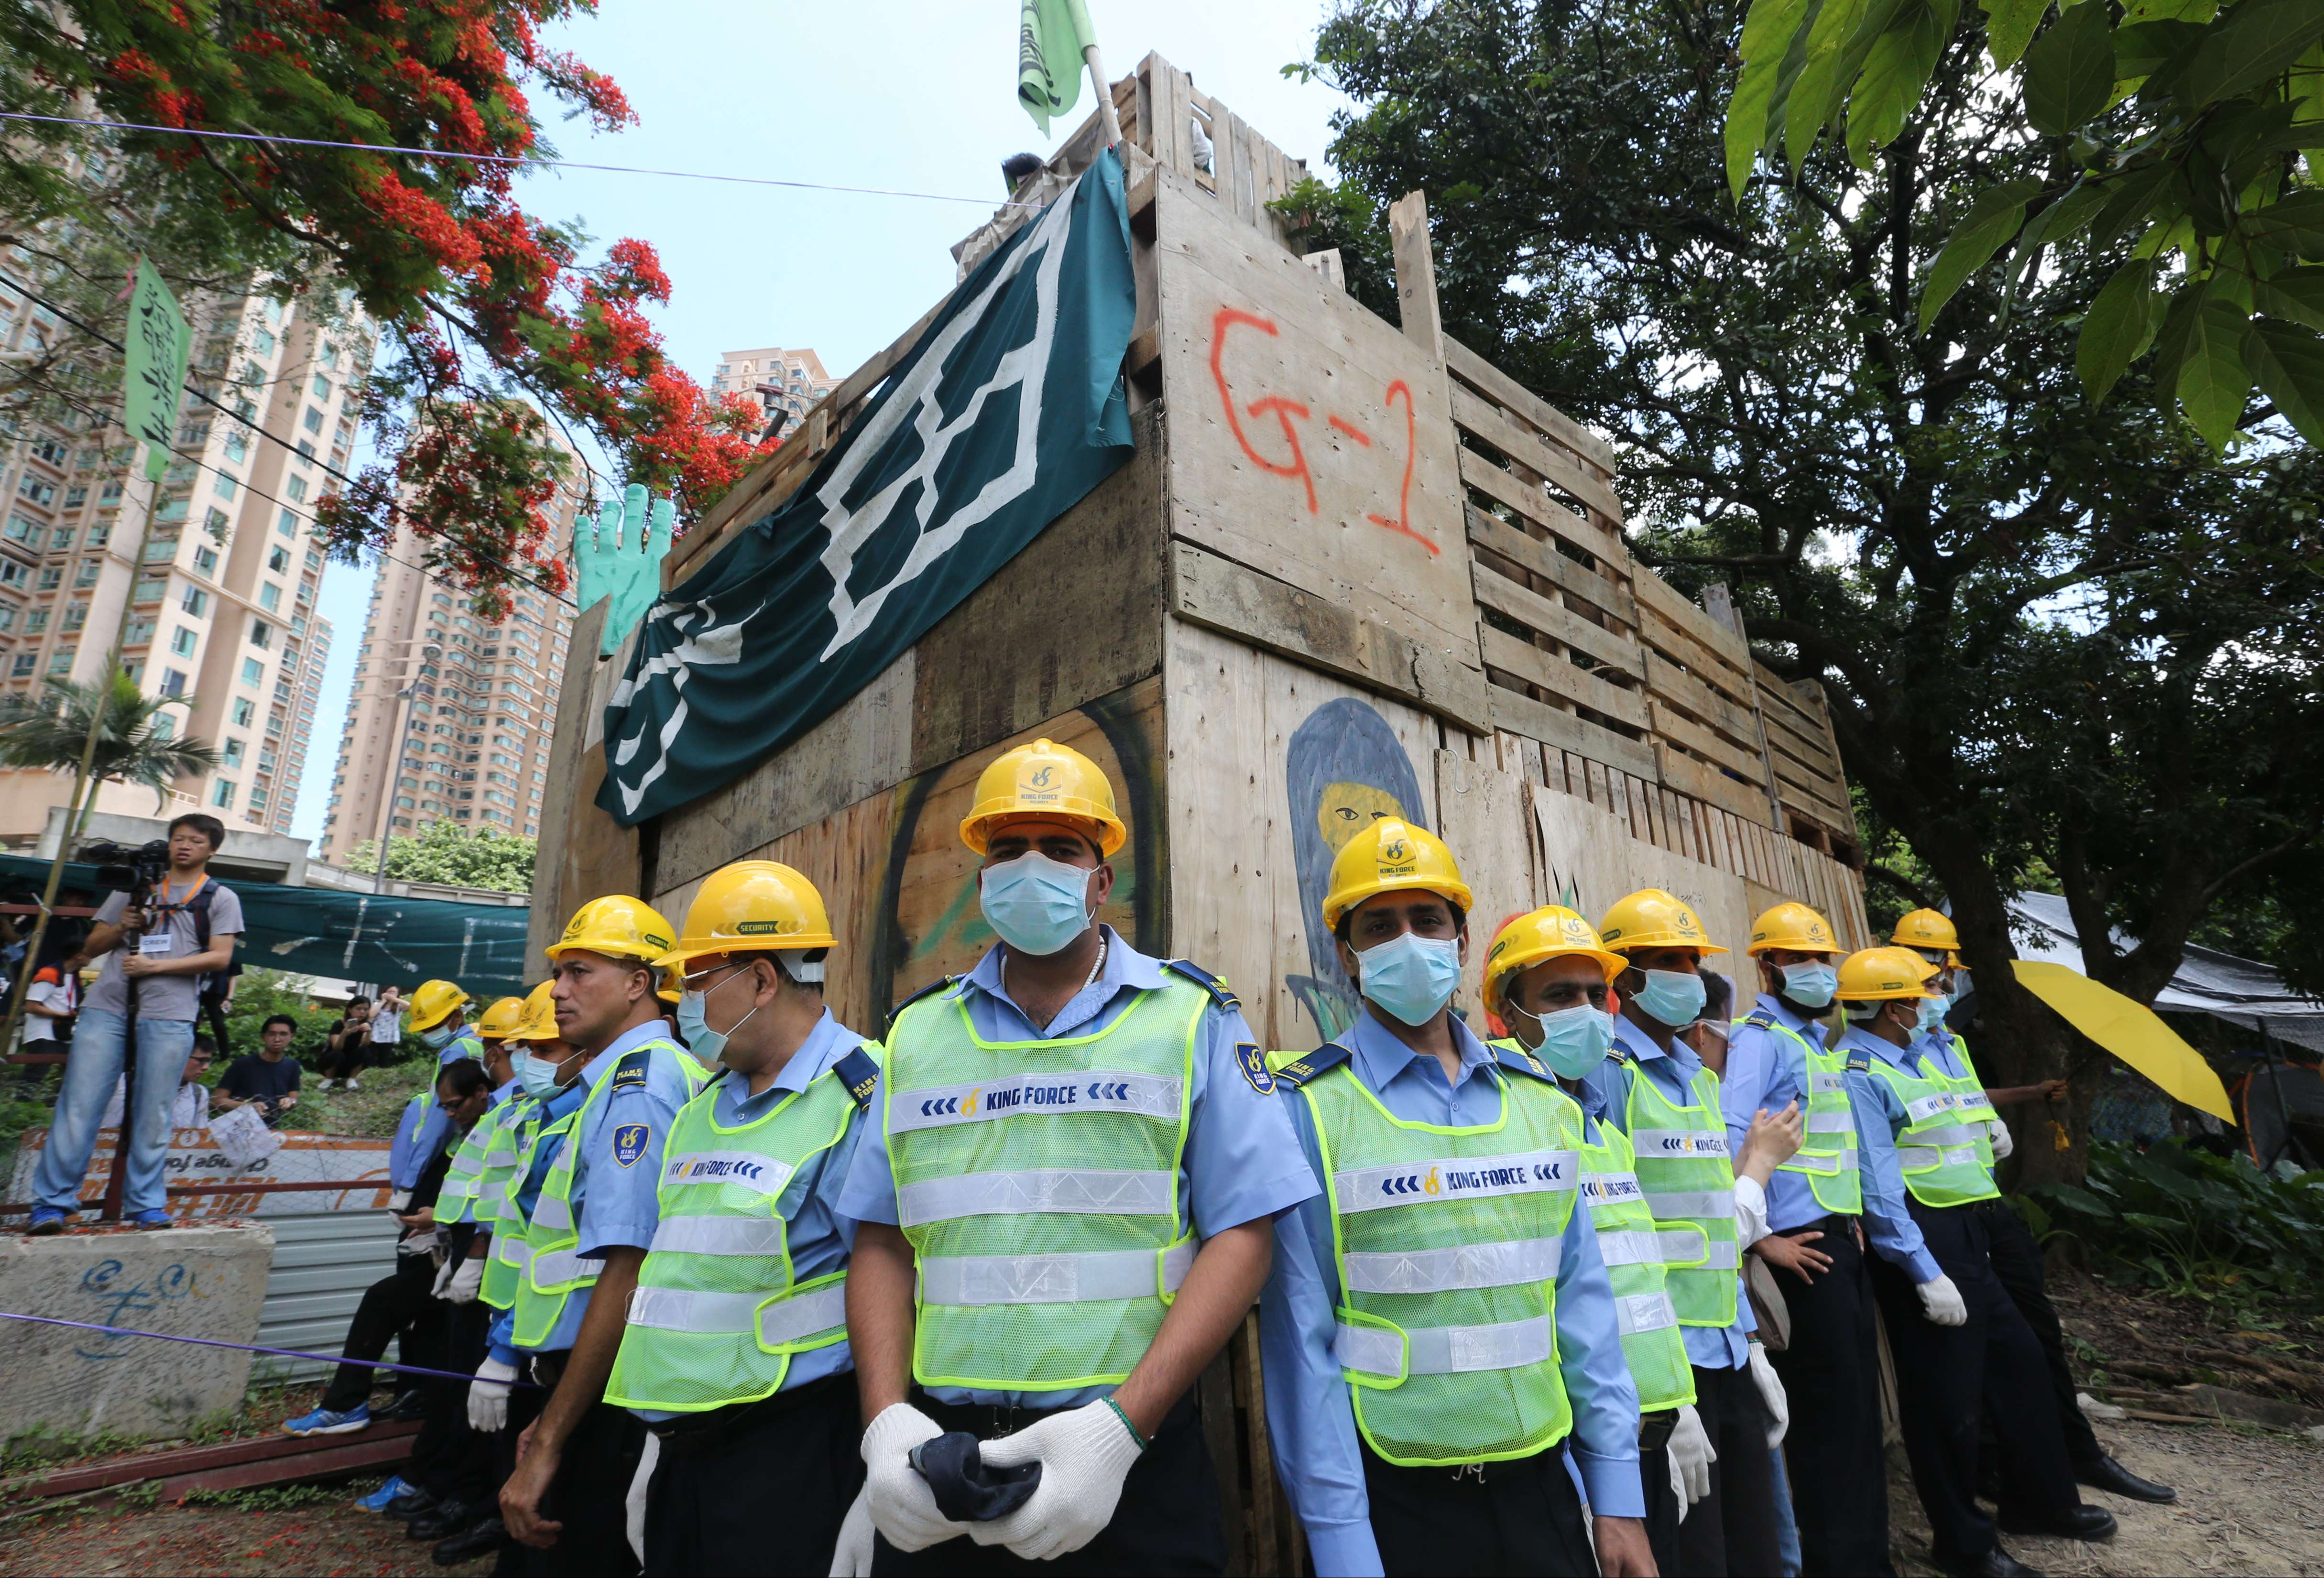 Security guards surround a wooden structure ascended by opponents of a development plan in the New Territories. Photo: Felix Wong